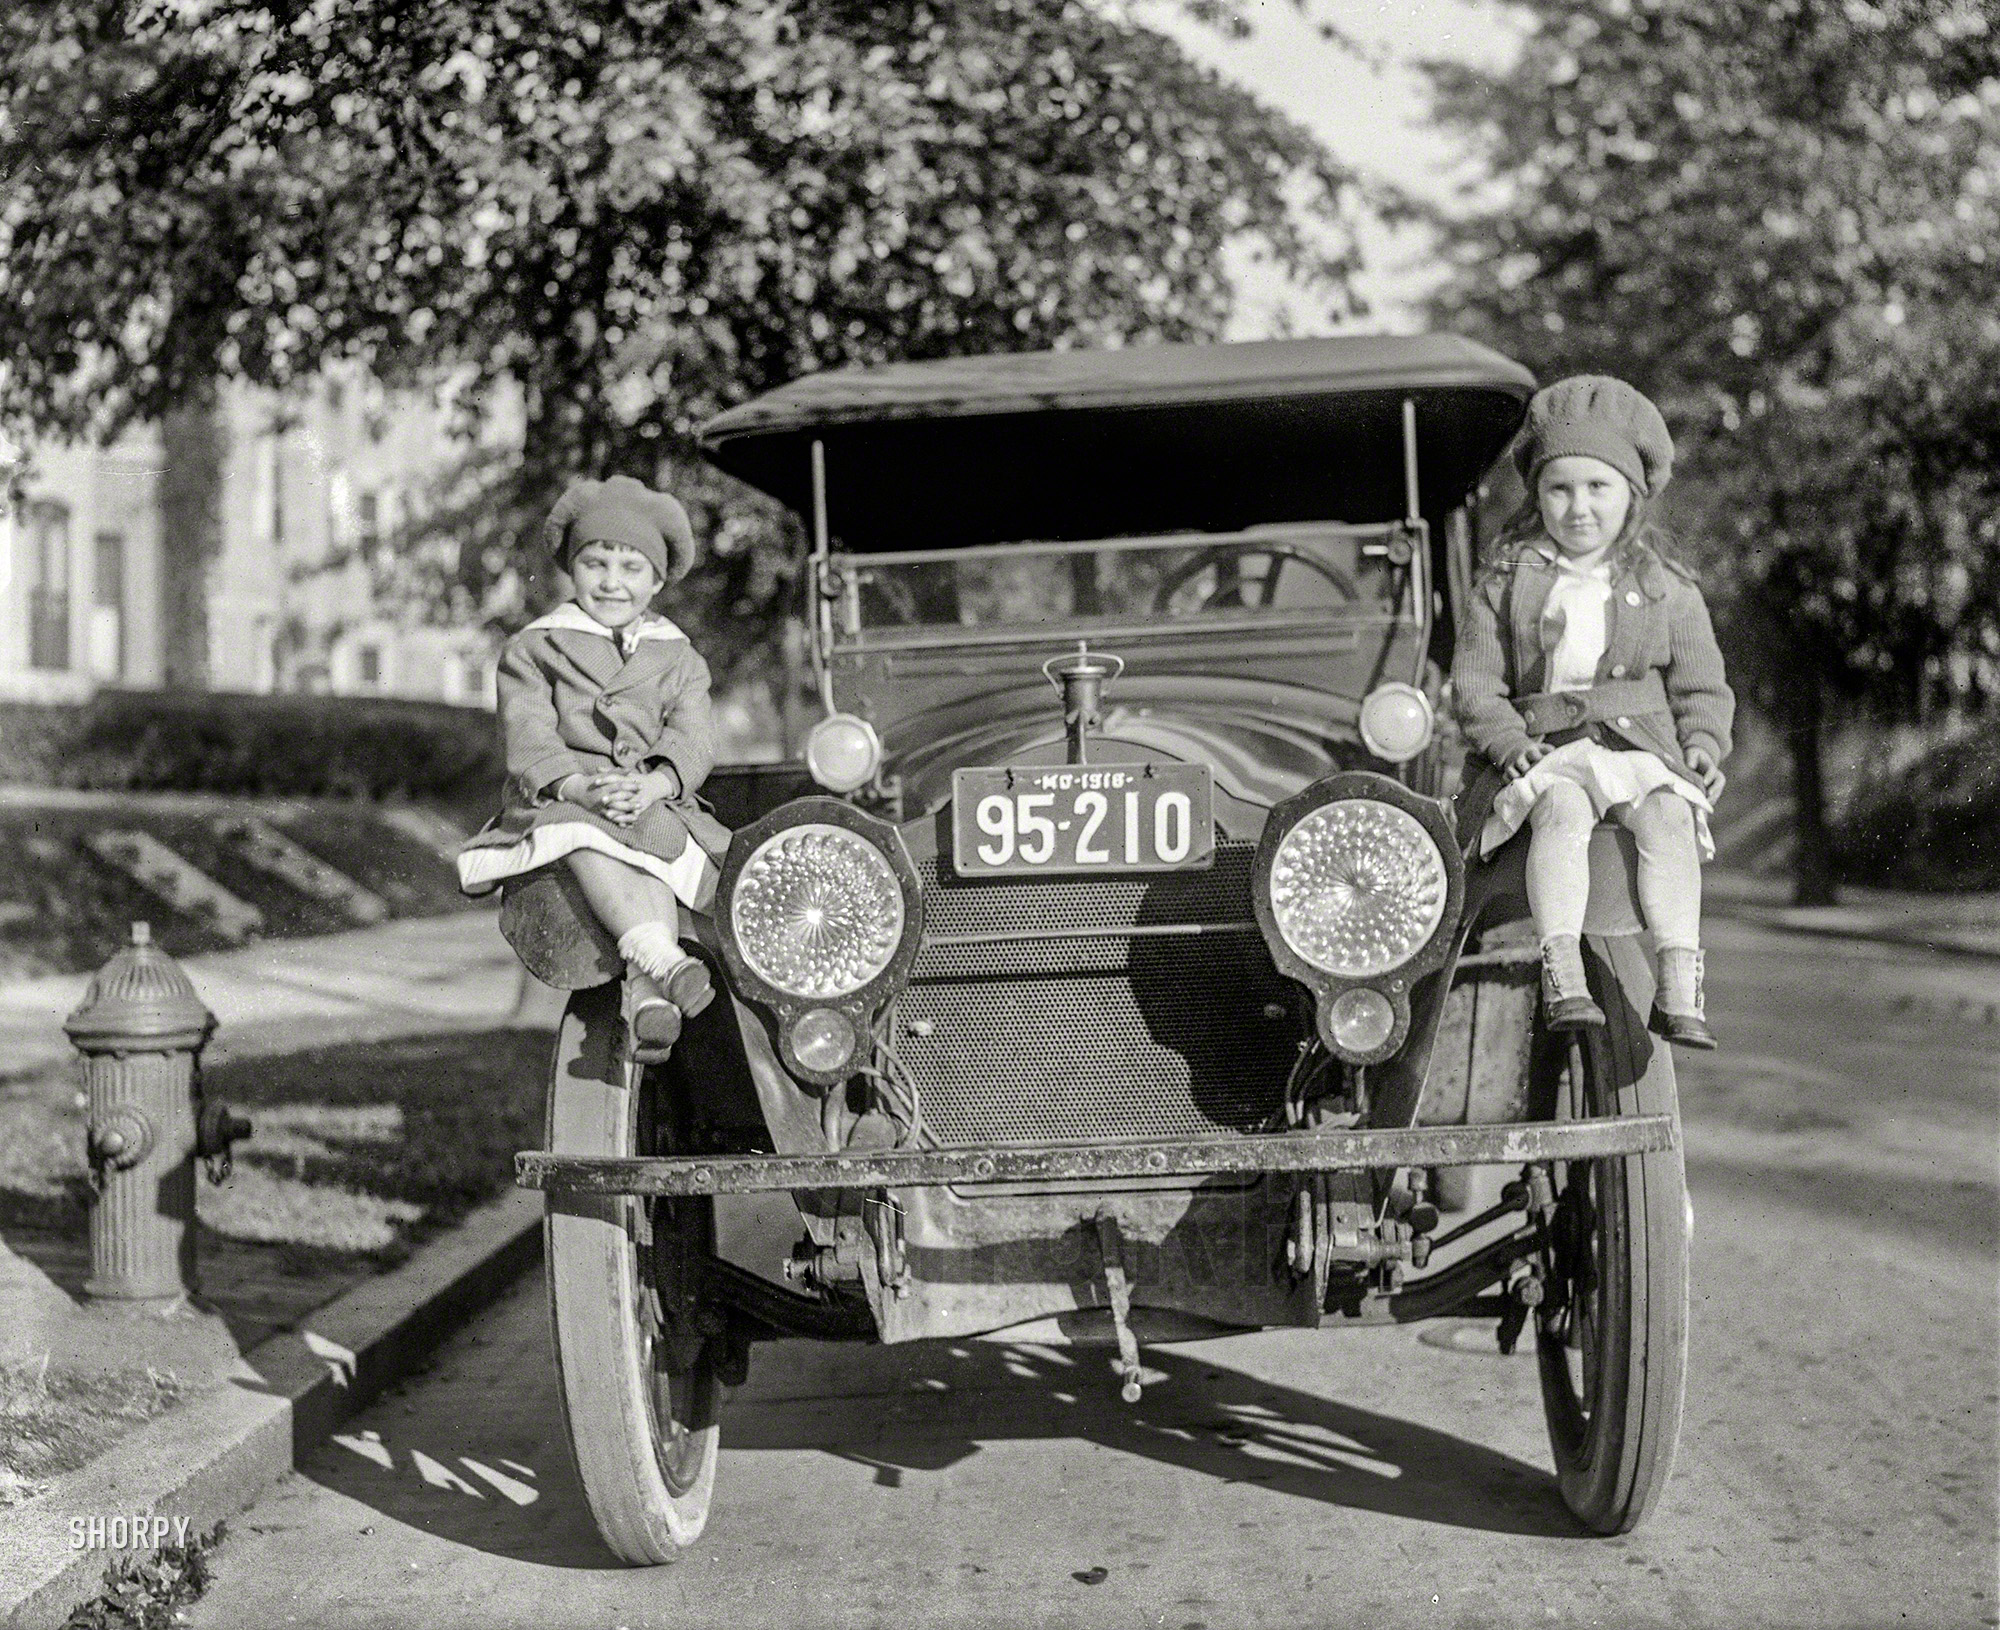 Washington, D.C., 1918. "C.N. O'Dell children." Illegally but adorably parked. 4x5 inch glass negative, National Photo Company Collection. View full size.